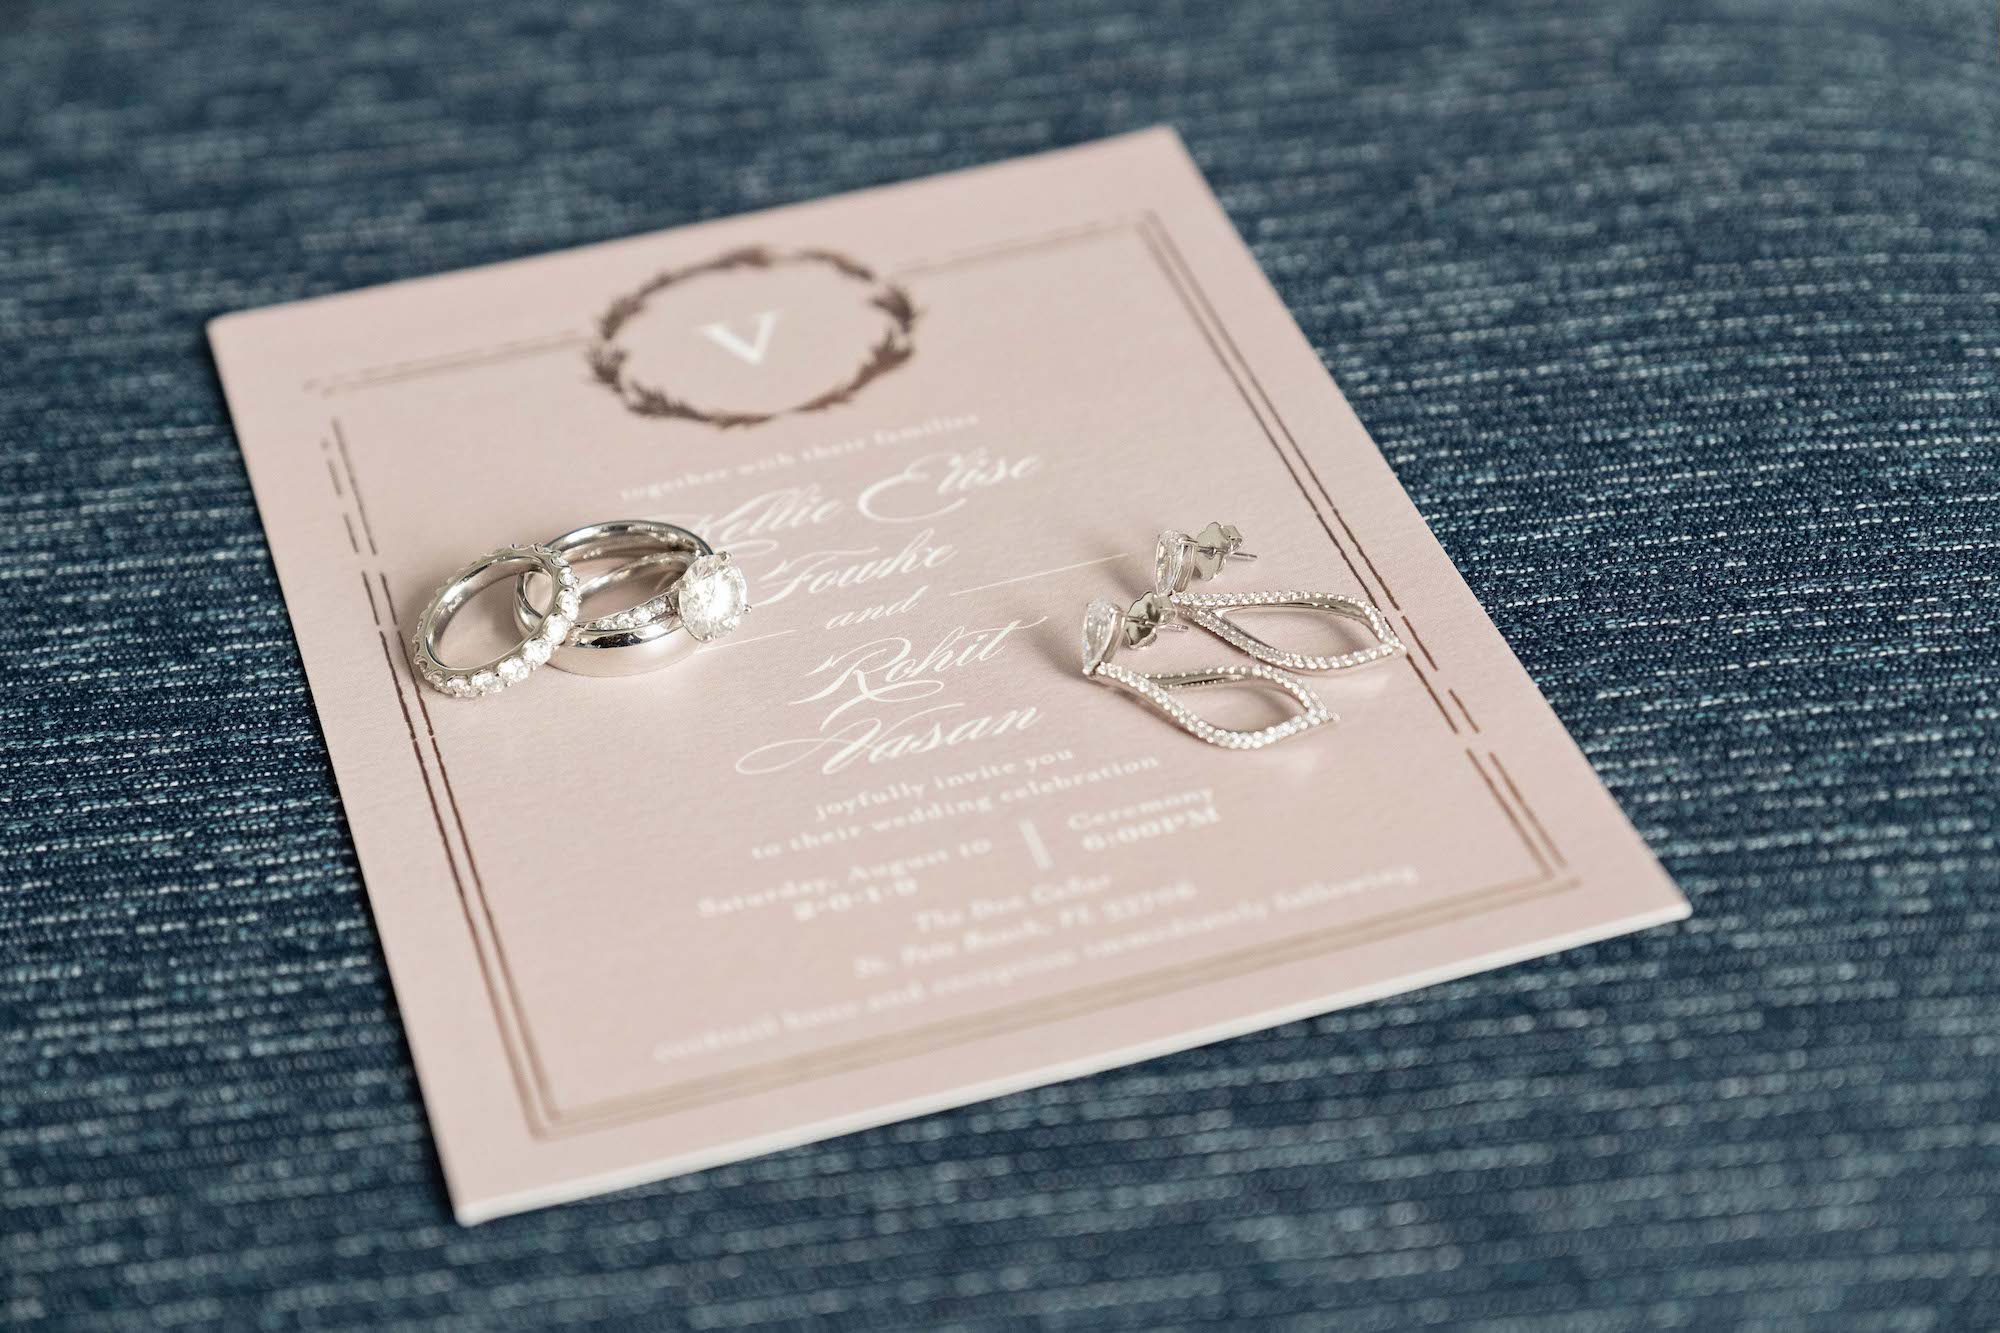 Classic Dusty Rose Wedding Invitation with Bridal Details, Teardrop Earrings, Solitaire Engagement Ring with Wedding Band.